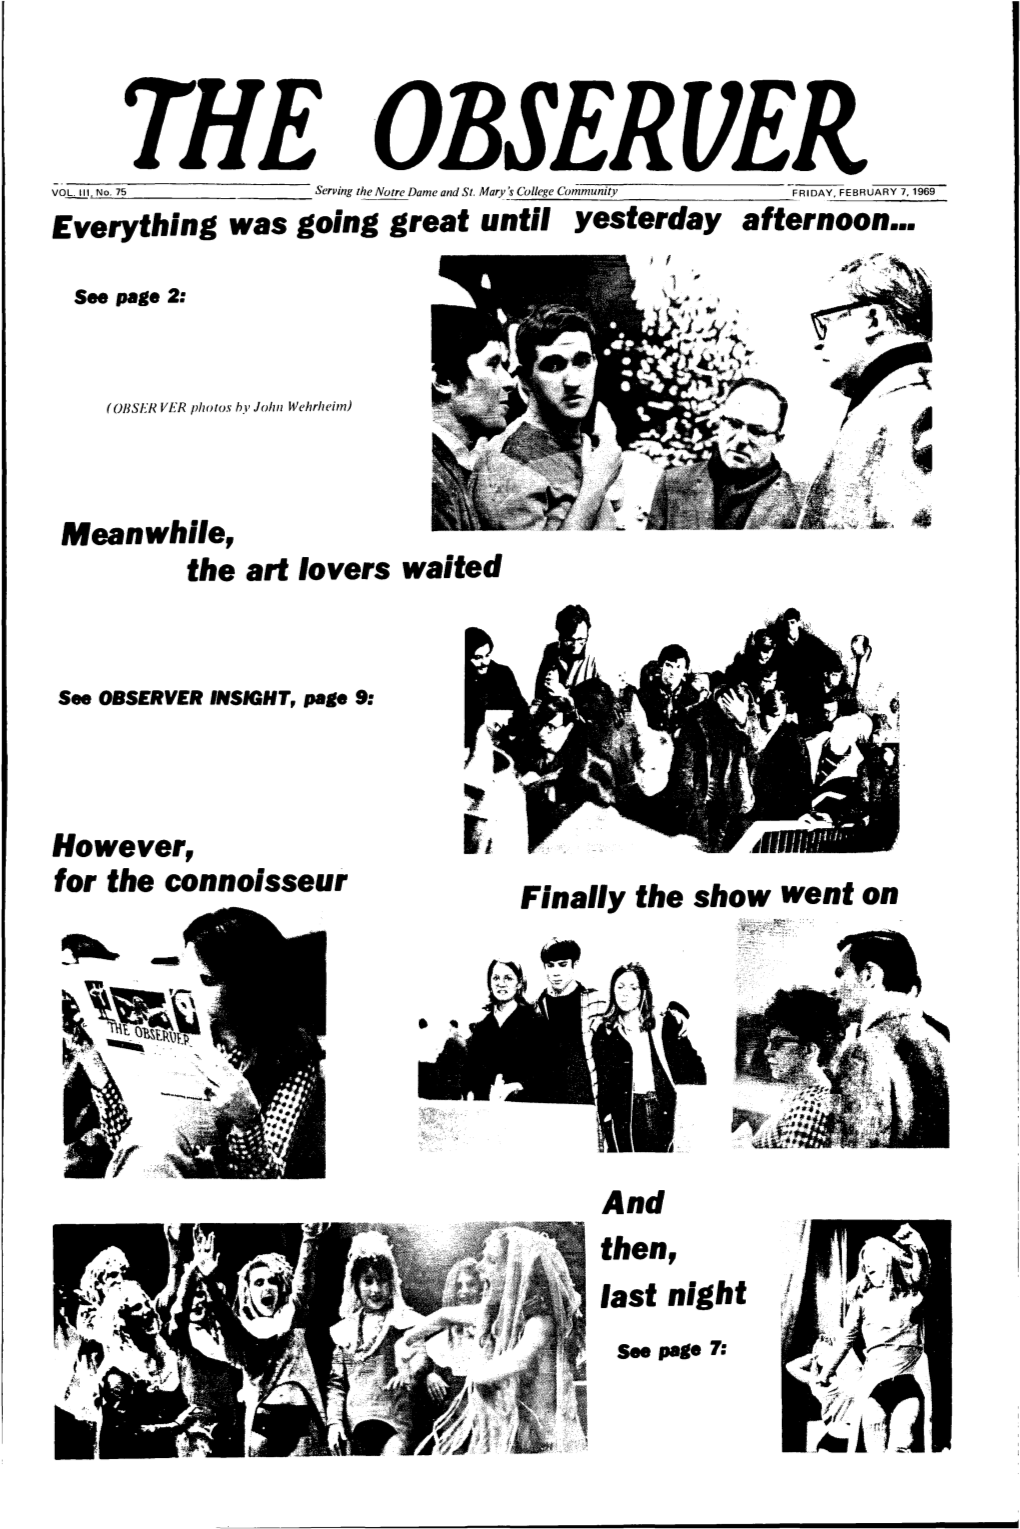 THE OBSERVER FRIDAY, FEBRUARY 7, 1969 • Art Show, Film Cancellation Brings Legal Issues the Student Union Announ- Terday Afternoon